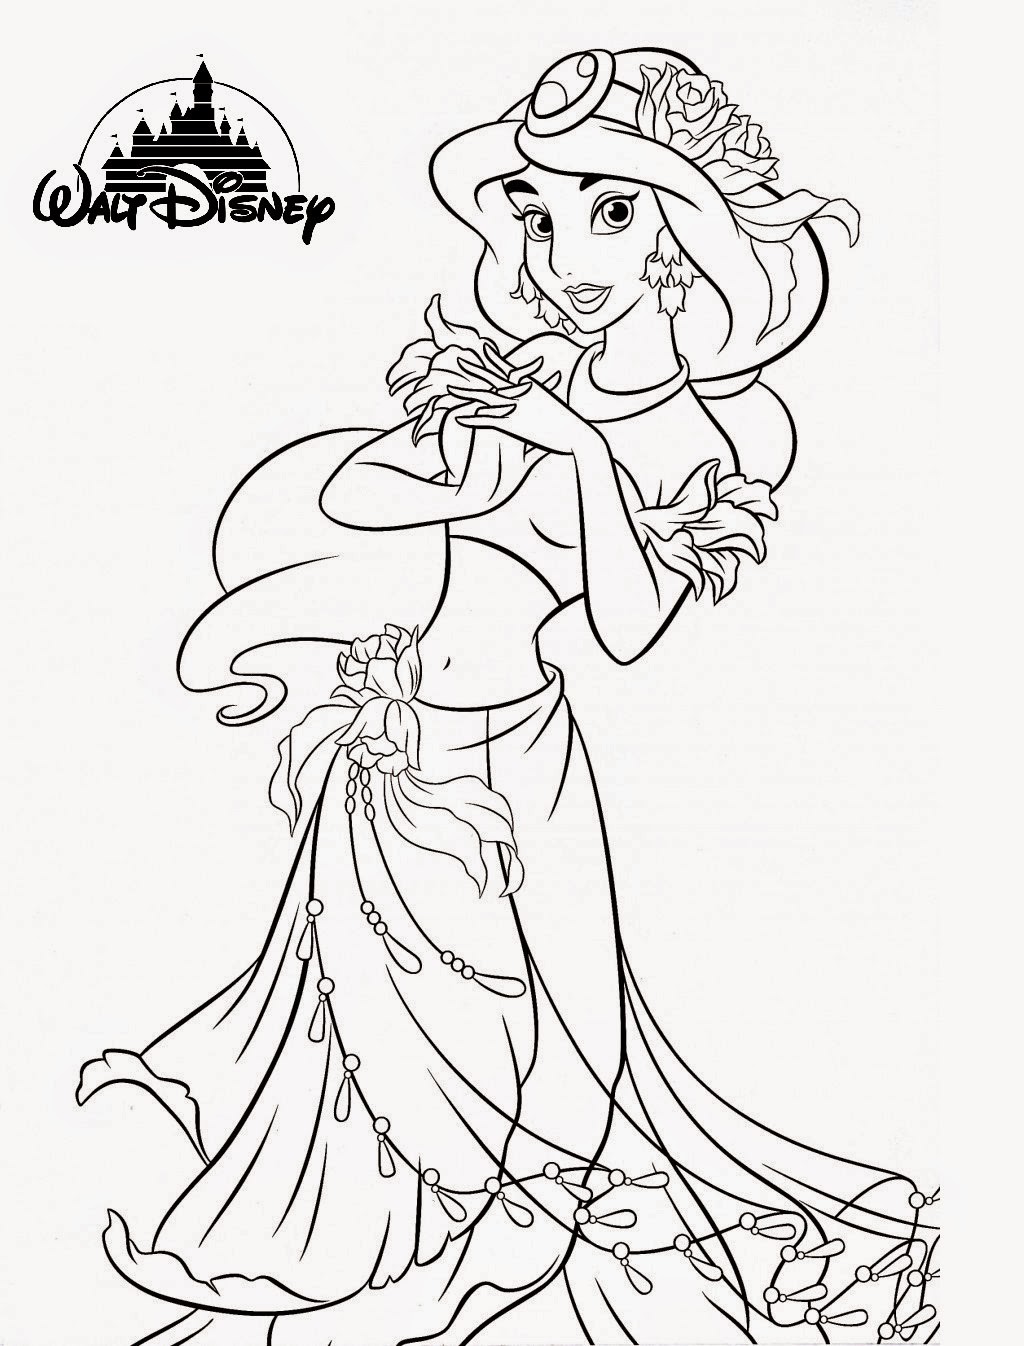 Disney Jasmine Coloring Pages 78 with Disney Jasmine Coloring Pages